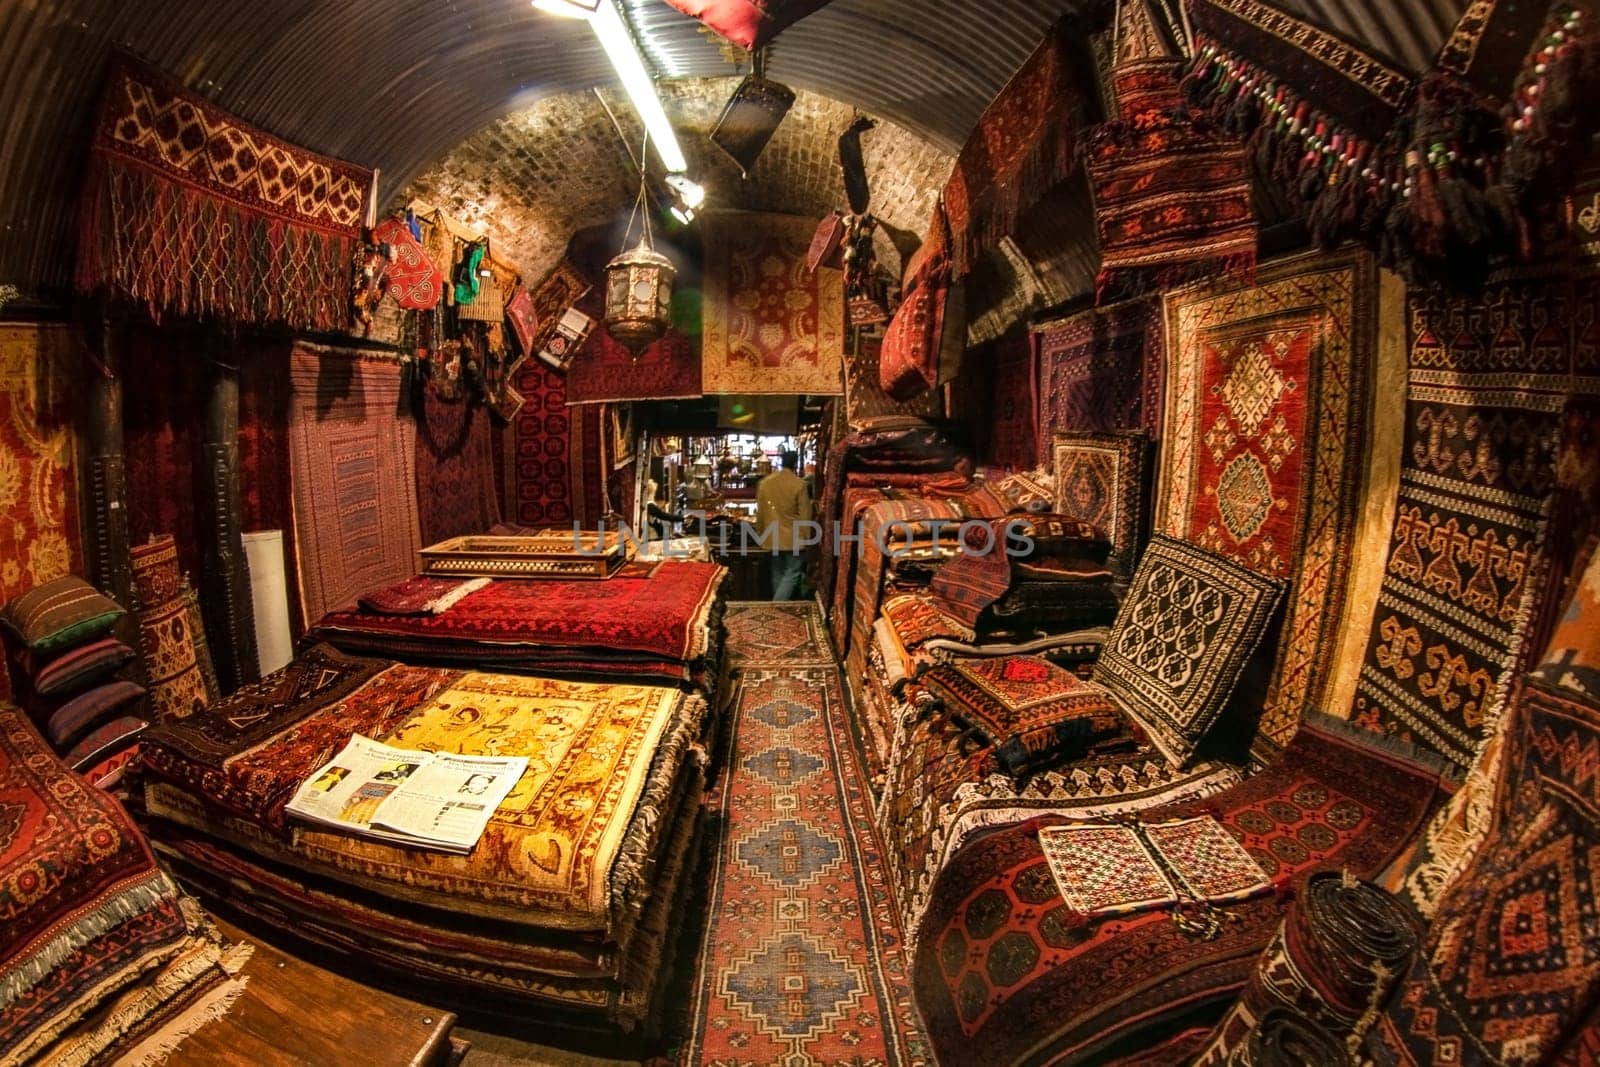 London, United Kingdom - April 01, 2007: Extreme wide angle (fisheye) photo  - oriental rugs and carpets on display at one of Camden Lock stalls, famous flea market in UK capital.